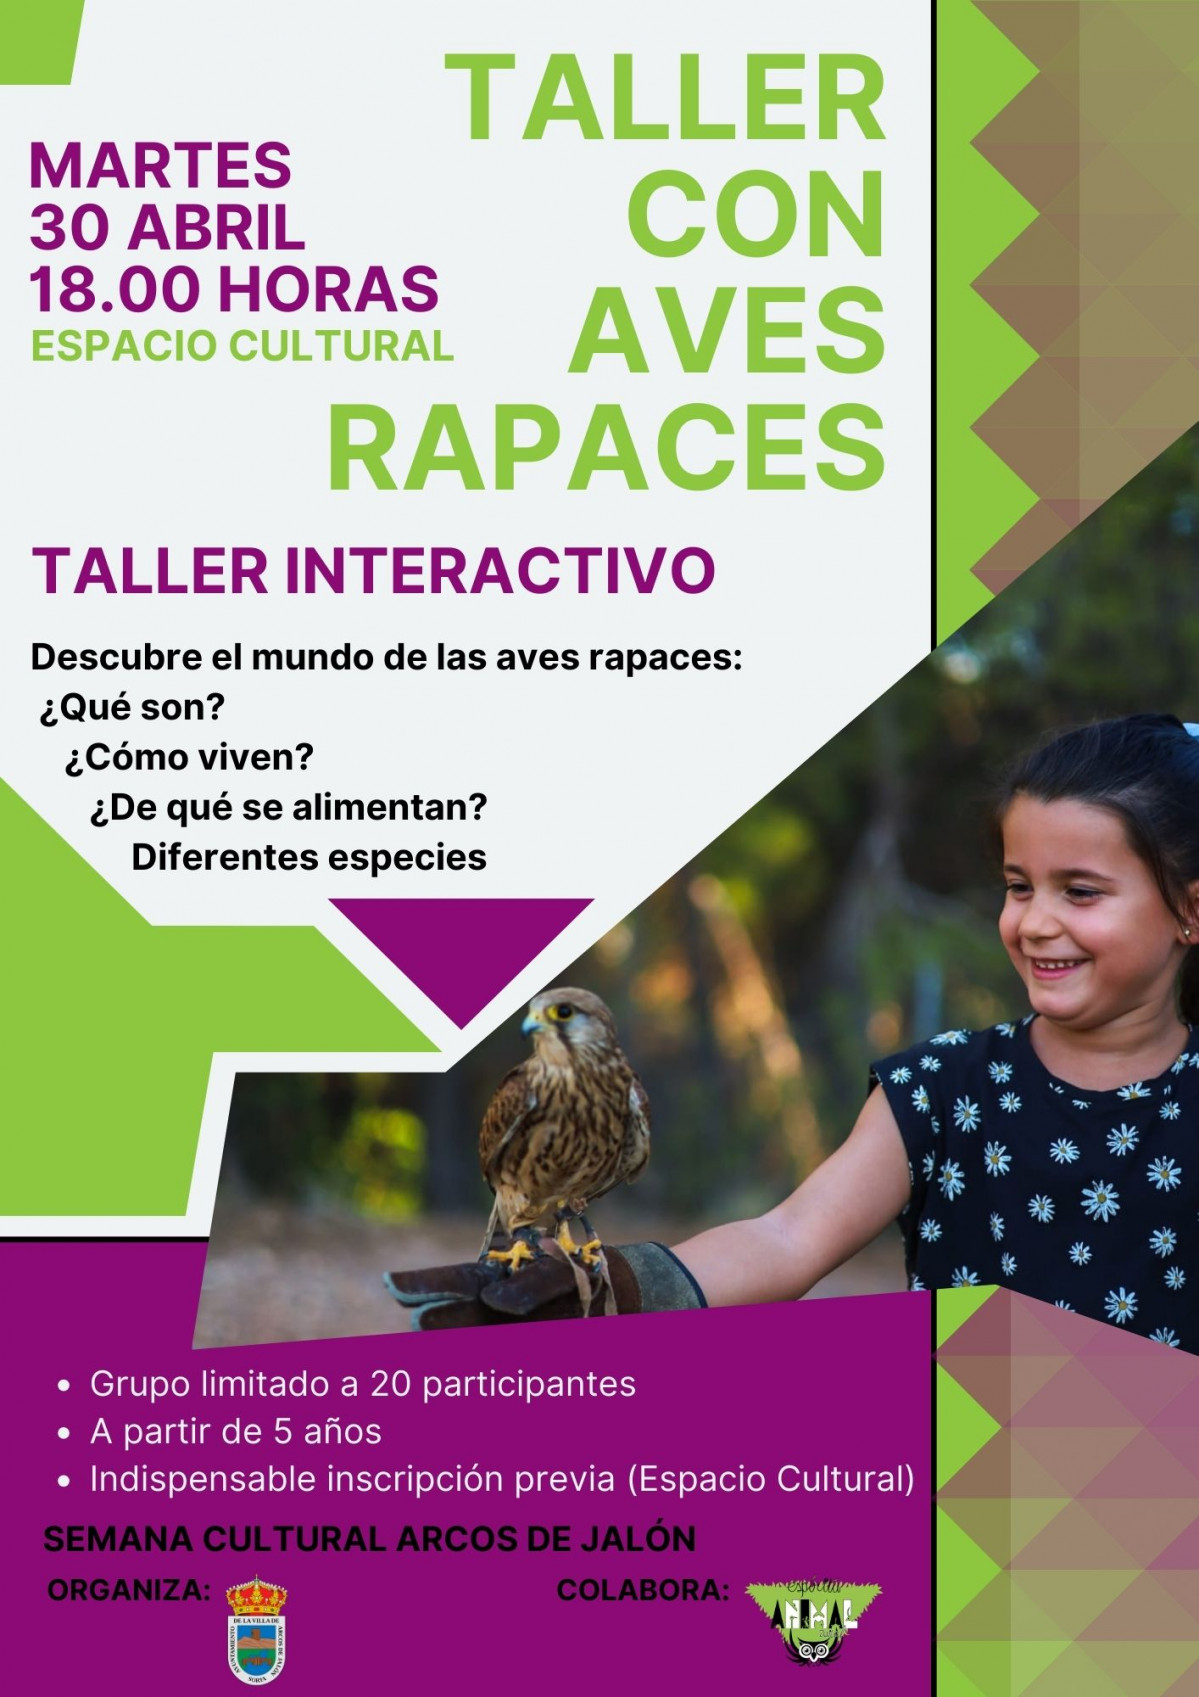 Taller con aves rapaces